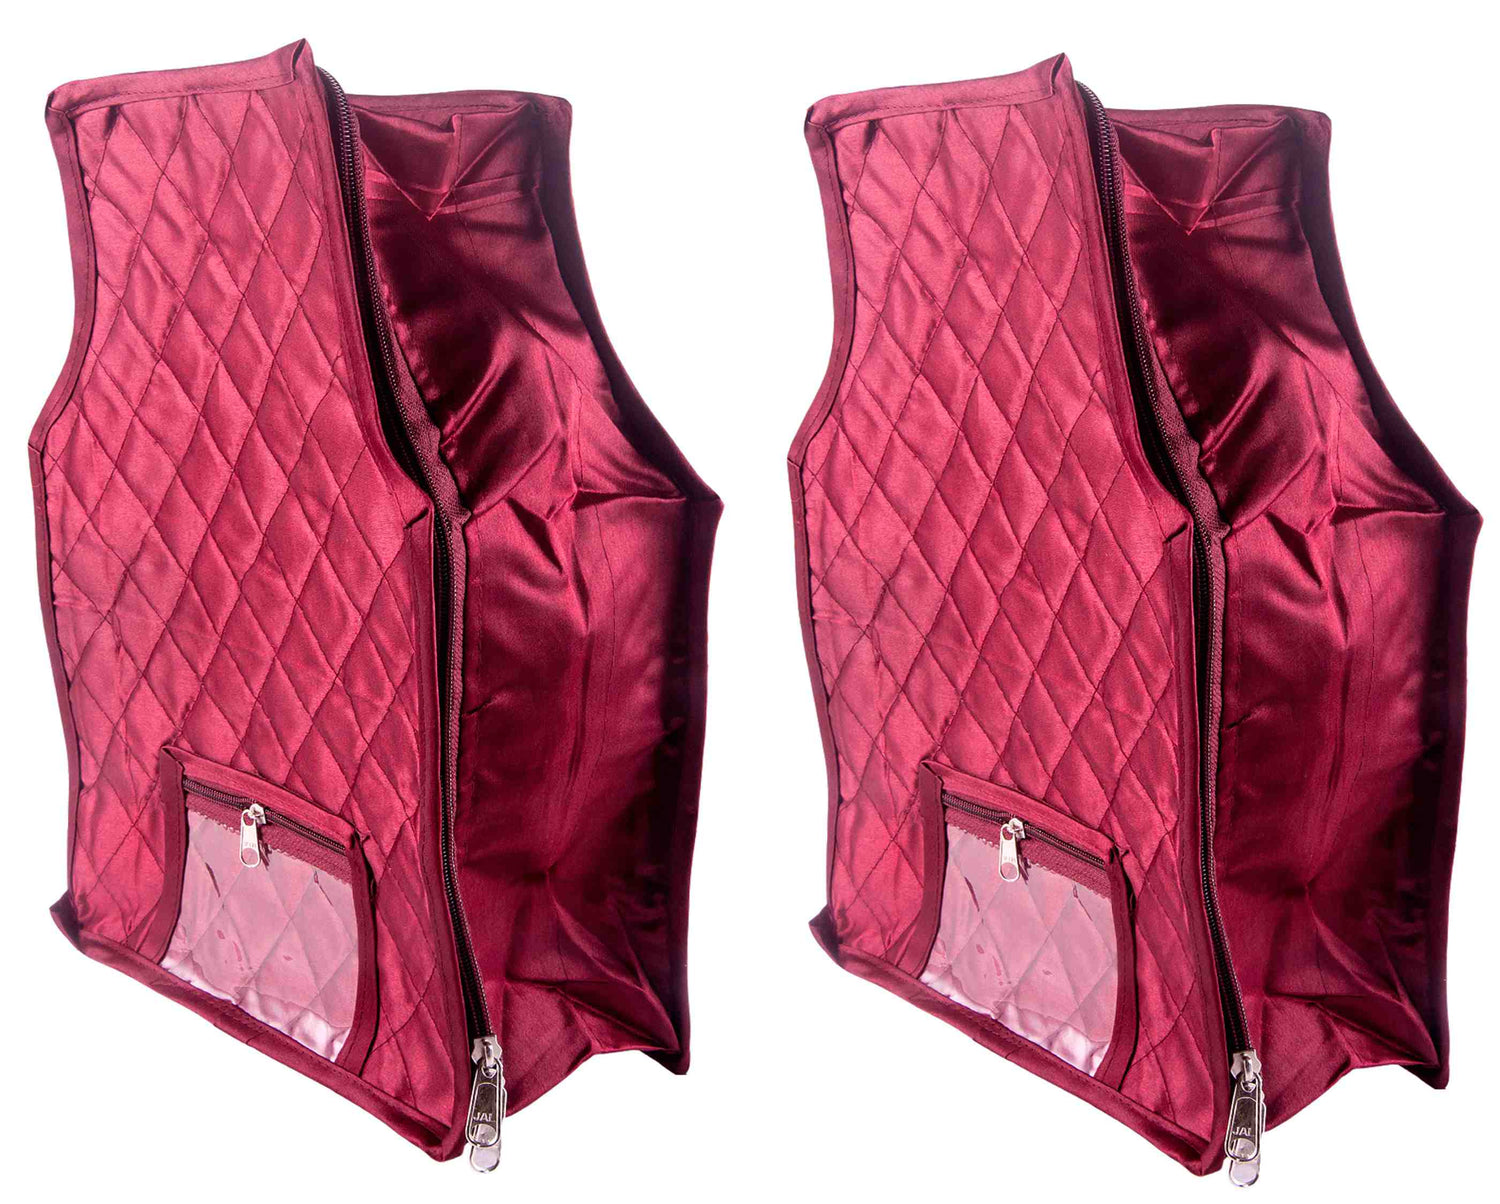 5 inch height blouse cover | wardrobe storage pack of 2 pcs. - FAVISM